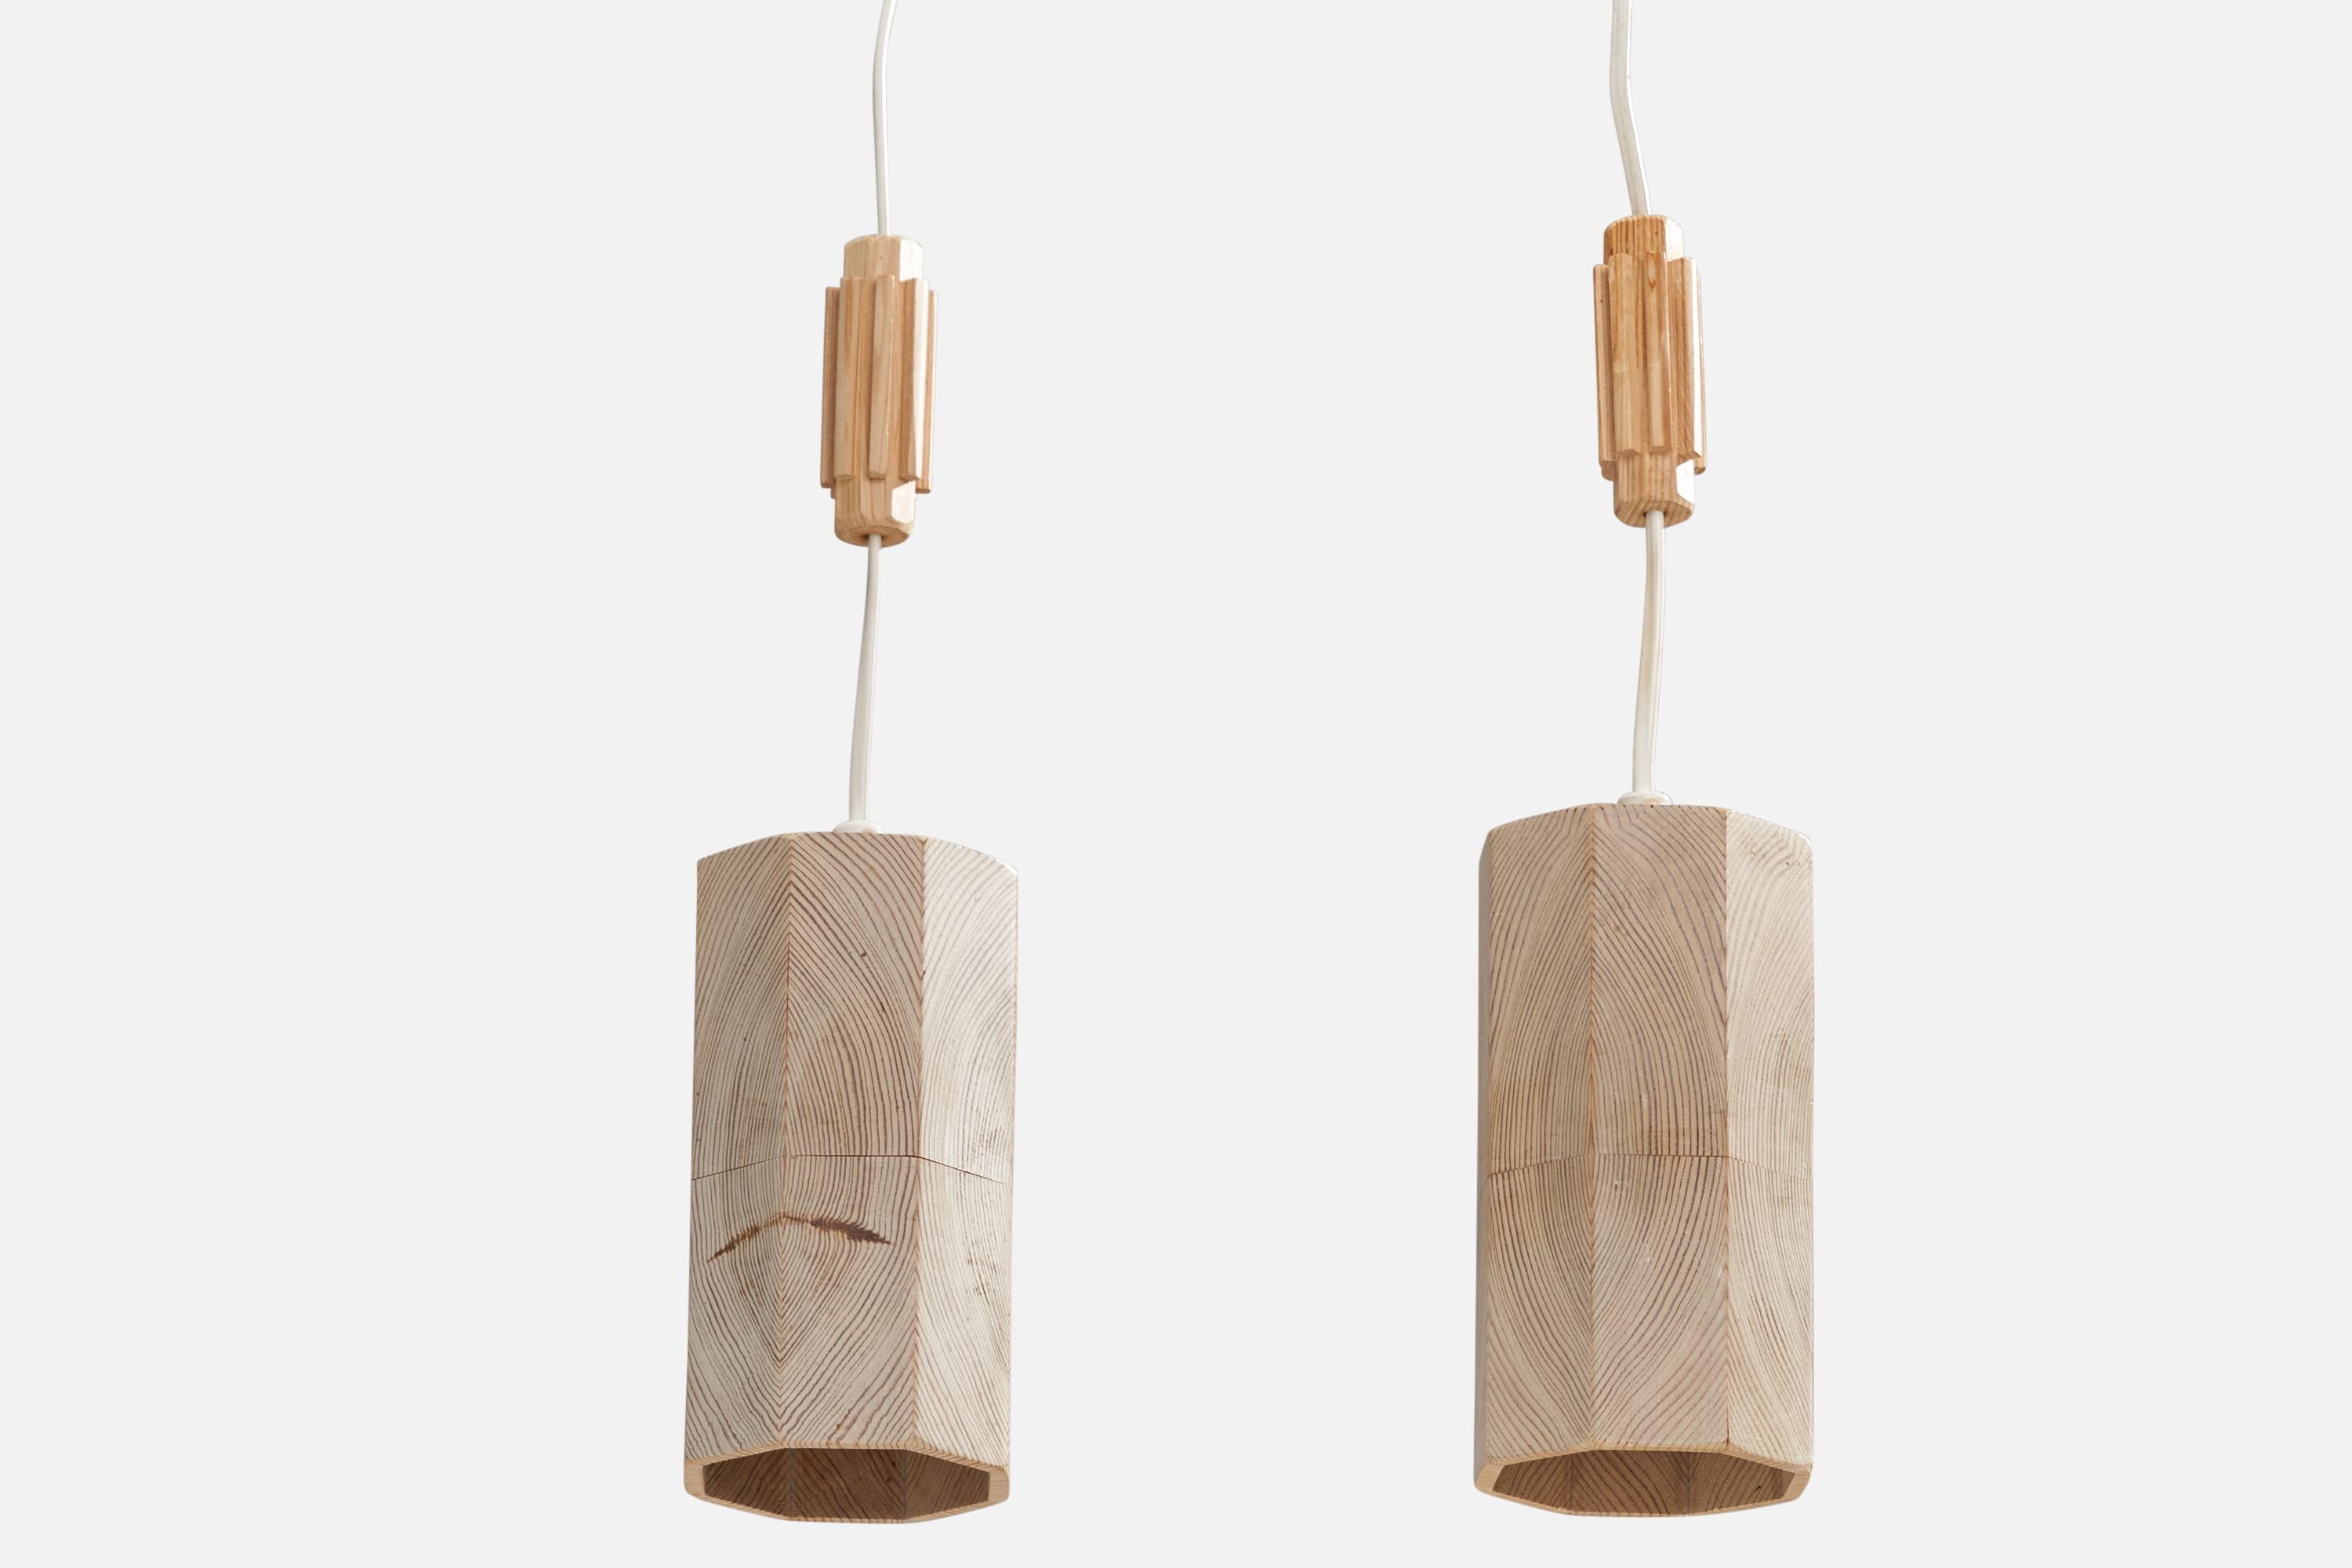 A pair of pine pendant lights designed and produced in Sweden, c. 1970s.

Dimensions of canopy (inches): N/A
Socket takes standard E-14 bulbs. 1 socket.There is no maximum wattage stated on the fixture. All lighting will be converted for US usage.